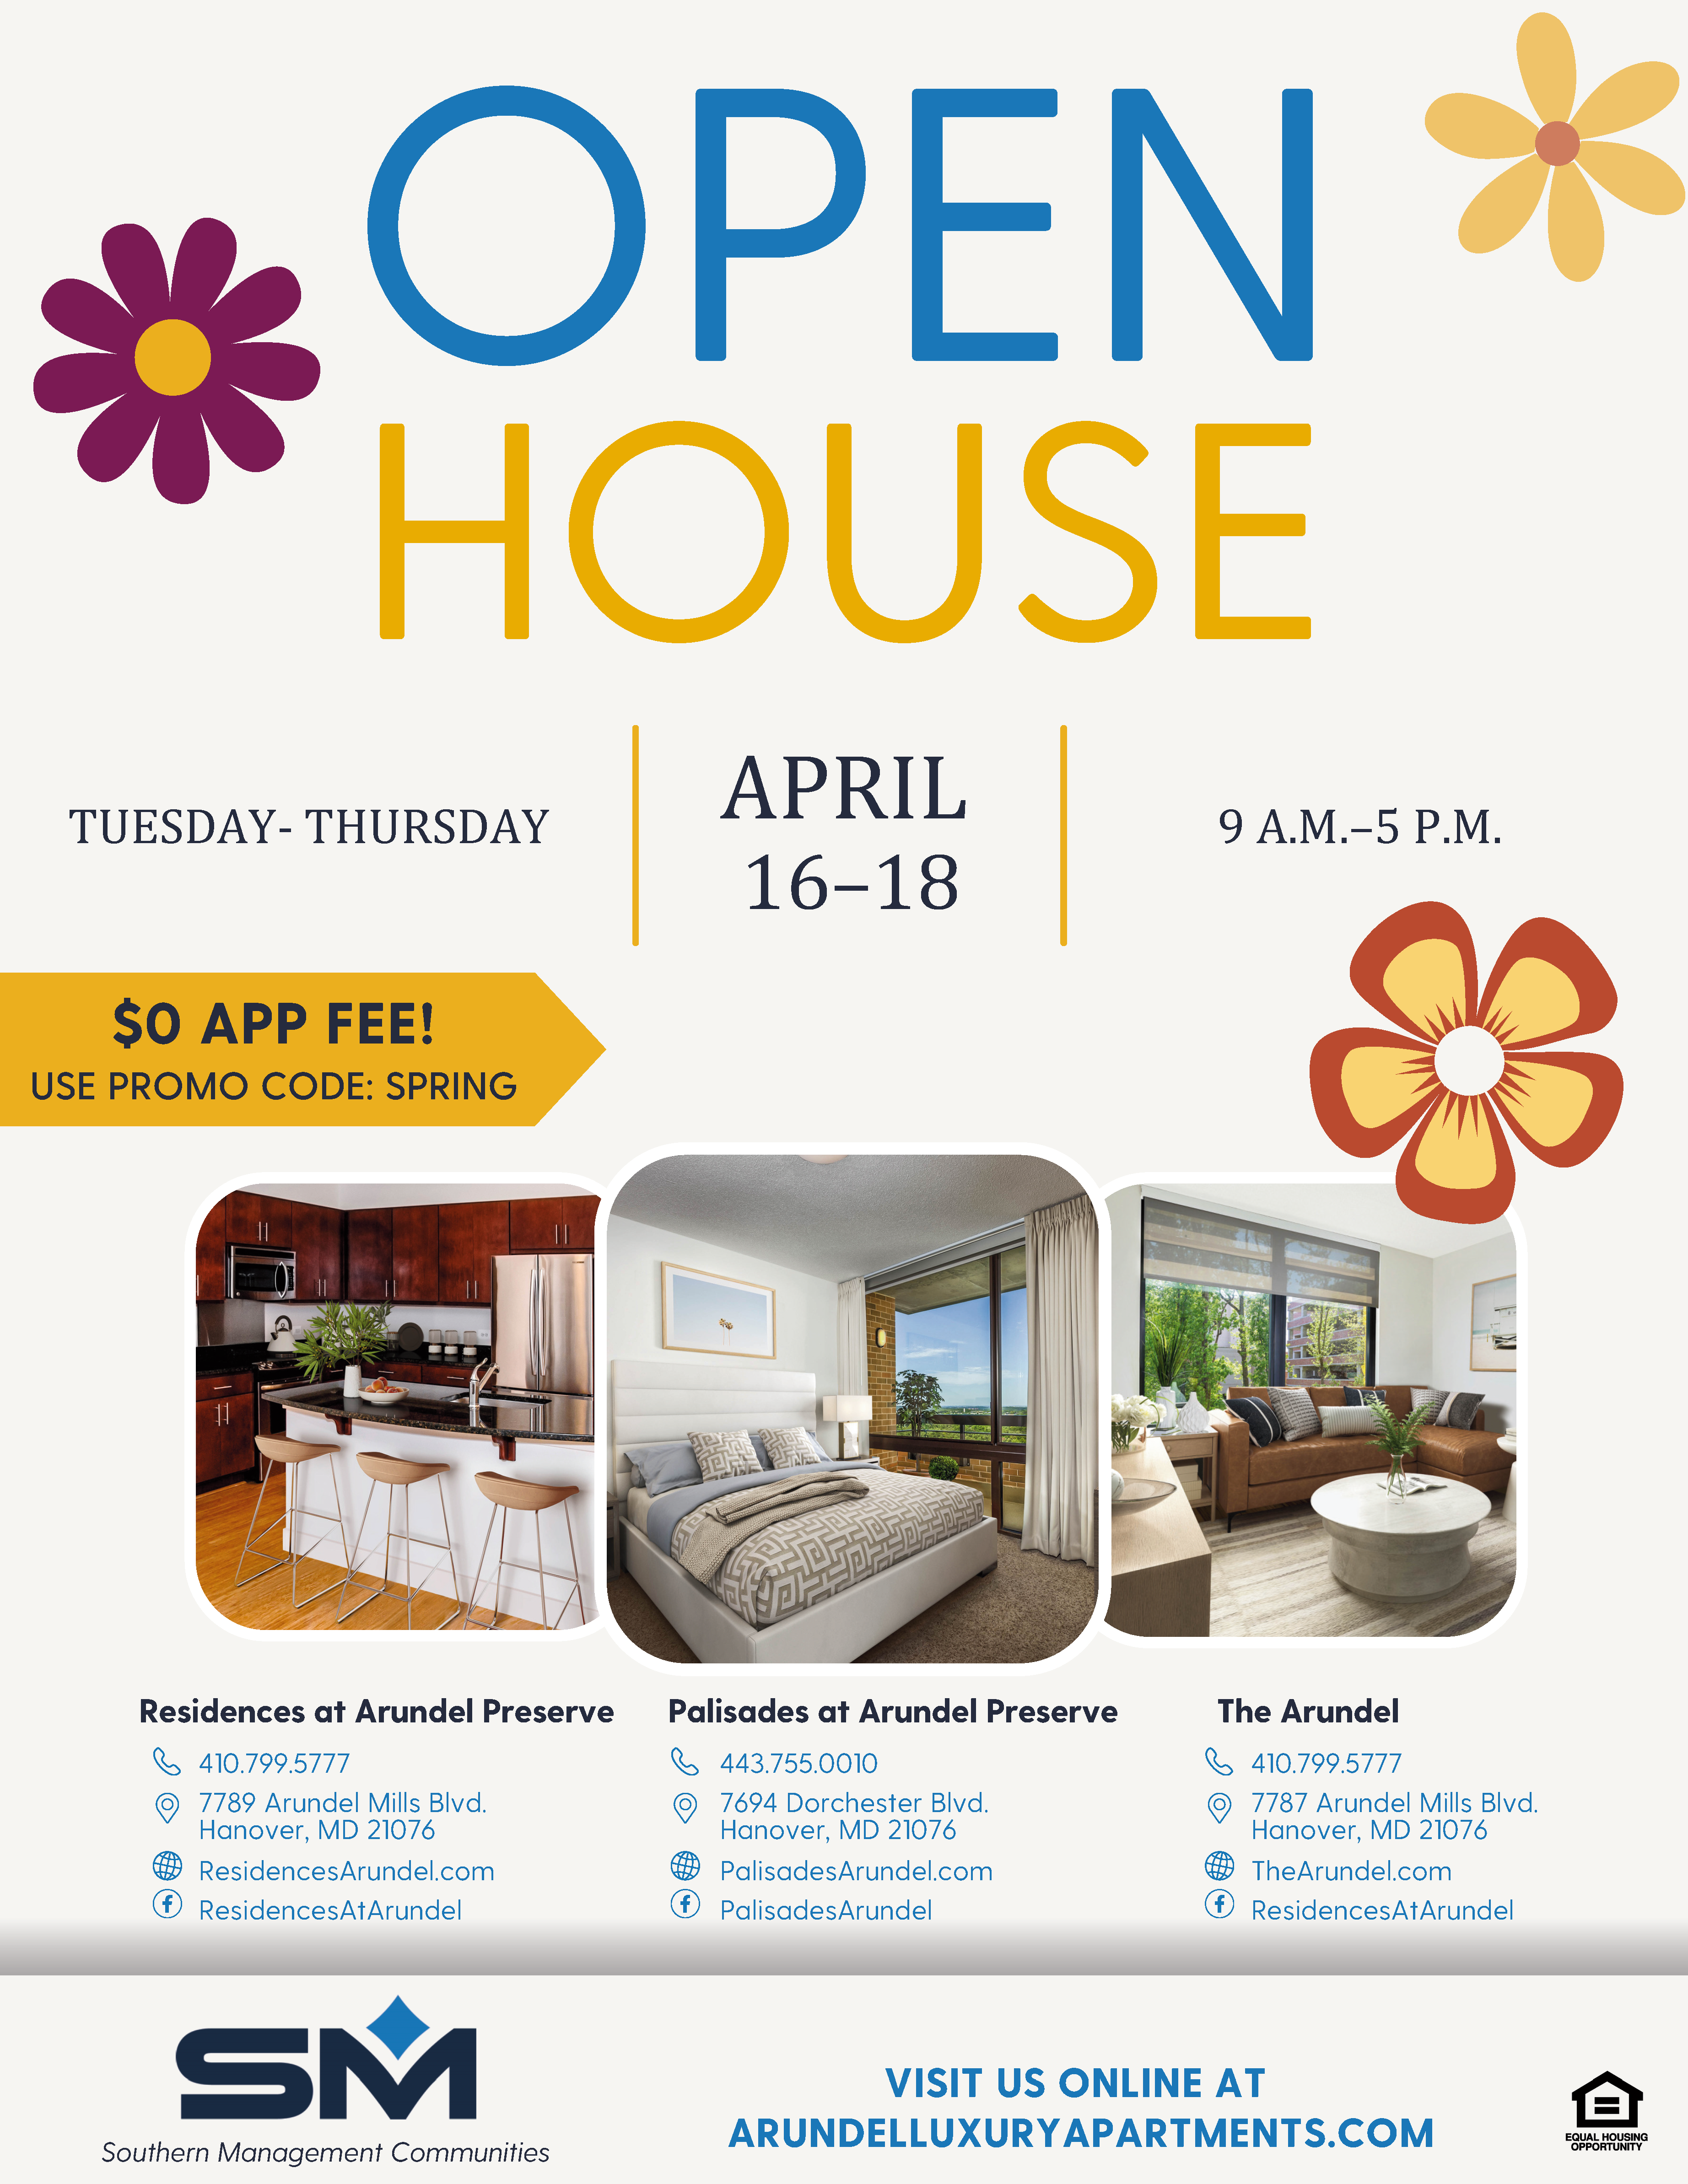 Arundel Open House Flyer southern management